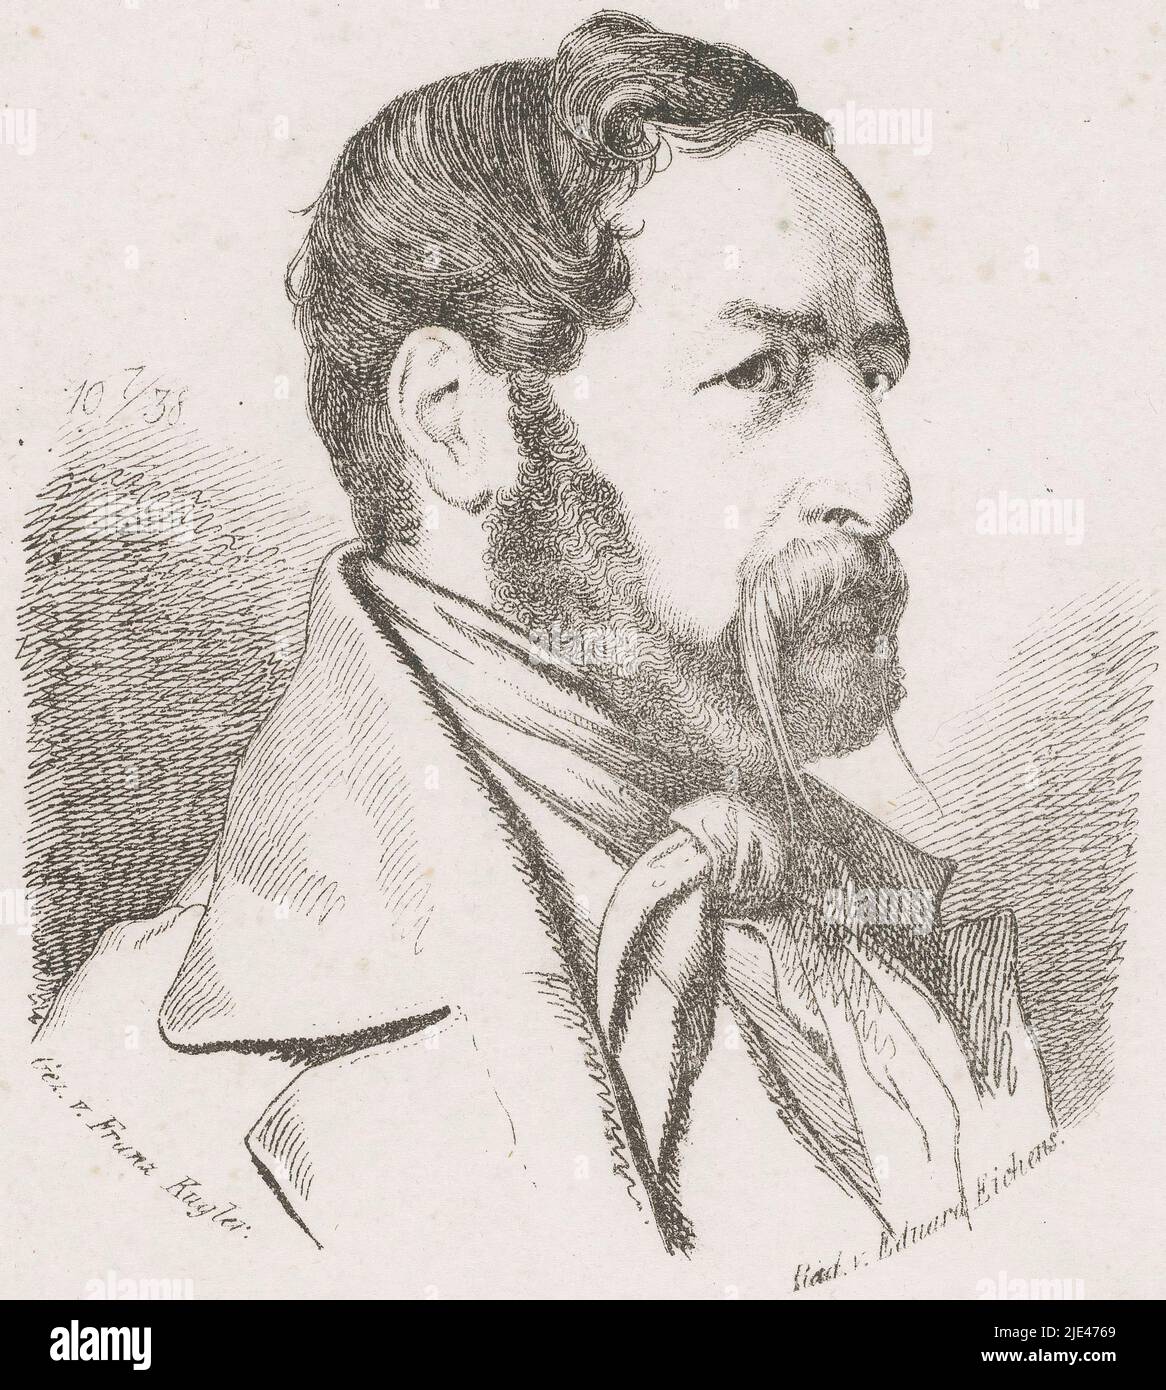 Portrait of Franz of Gaudy at age 38, Eduard Eichens, after Franz Kugler, 1838 - 1877, print maker: Eduard Eichens, (mentioned on object), intermediary draughtsman: Franz Kugler, (mentioned on object), 1838 - 1877, paper, etching, h 211 mm - w 139 mm Stock Photo